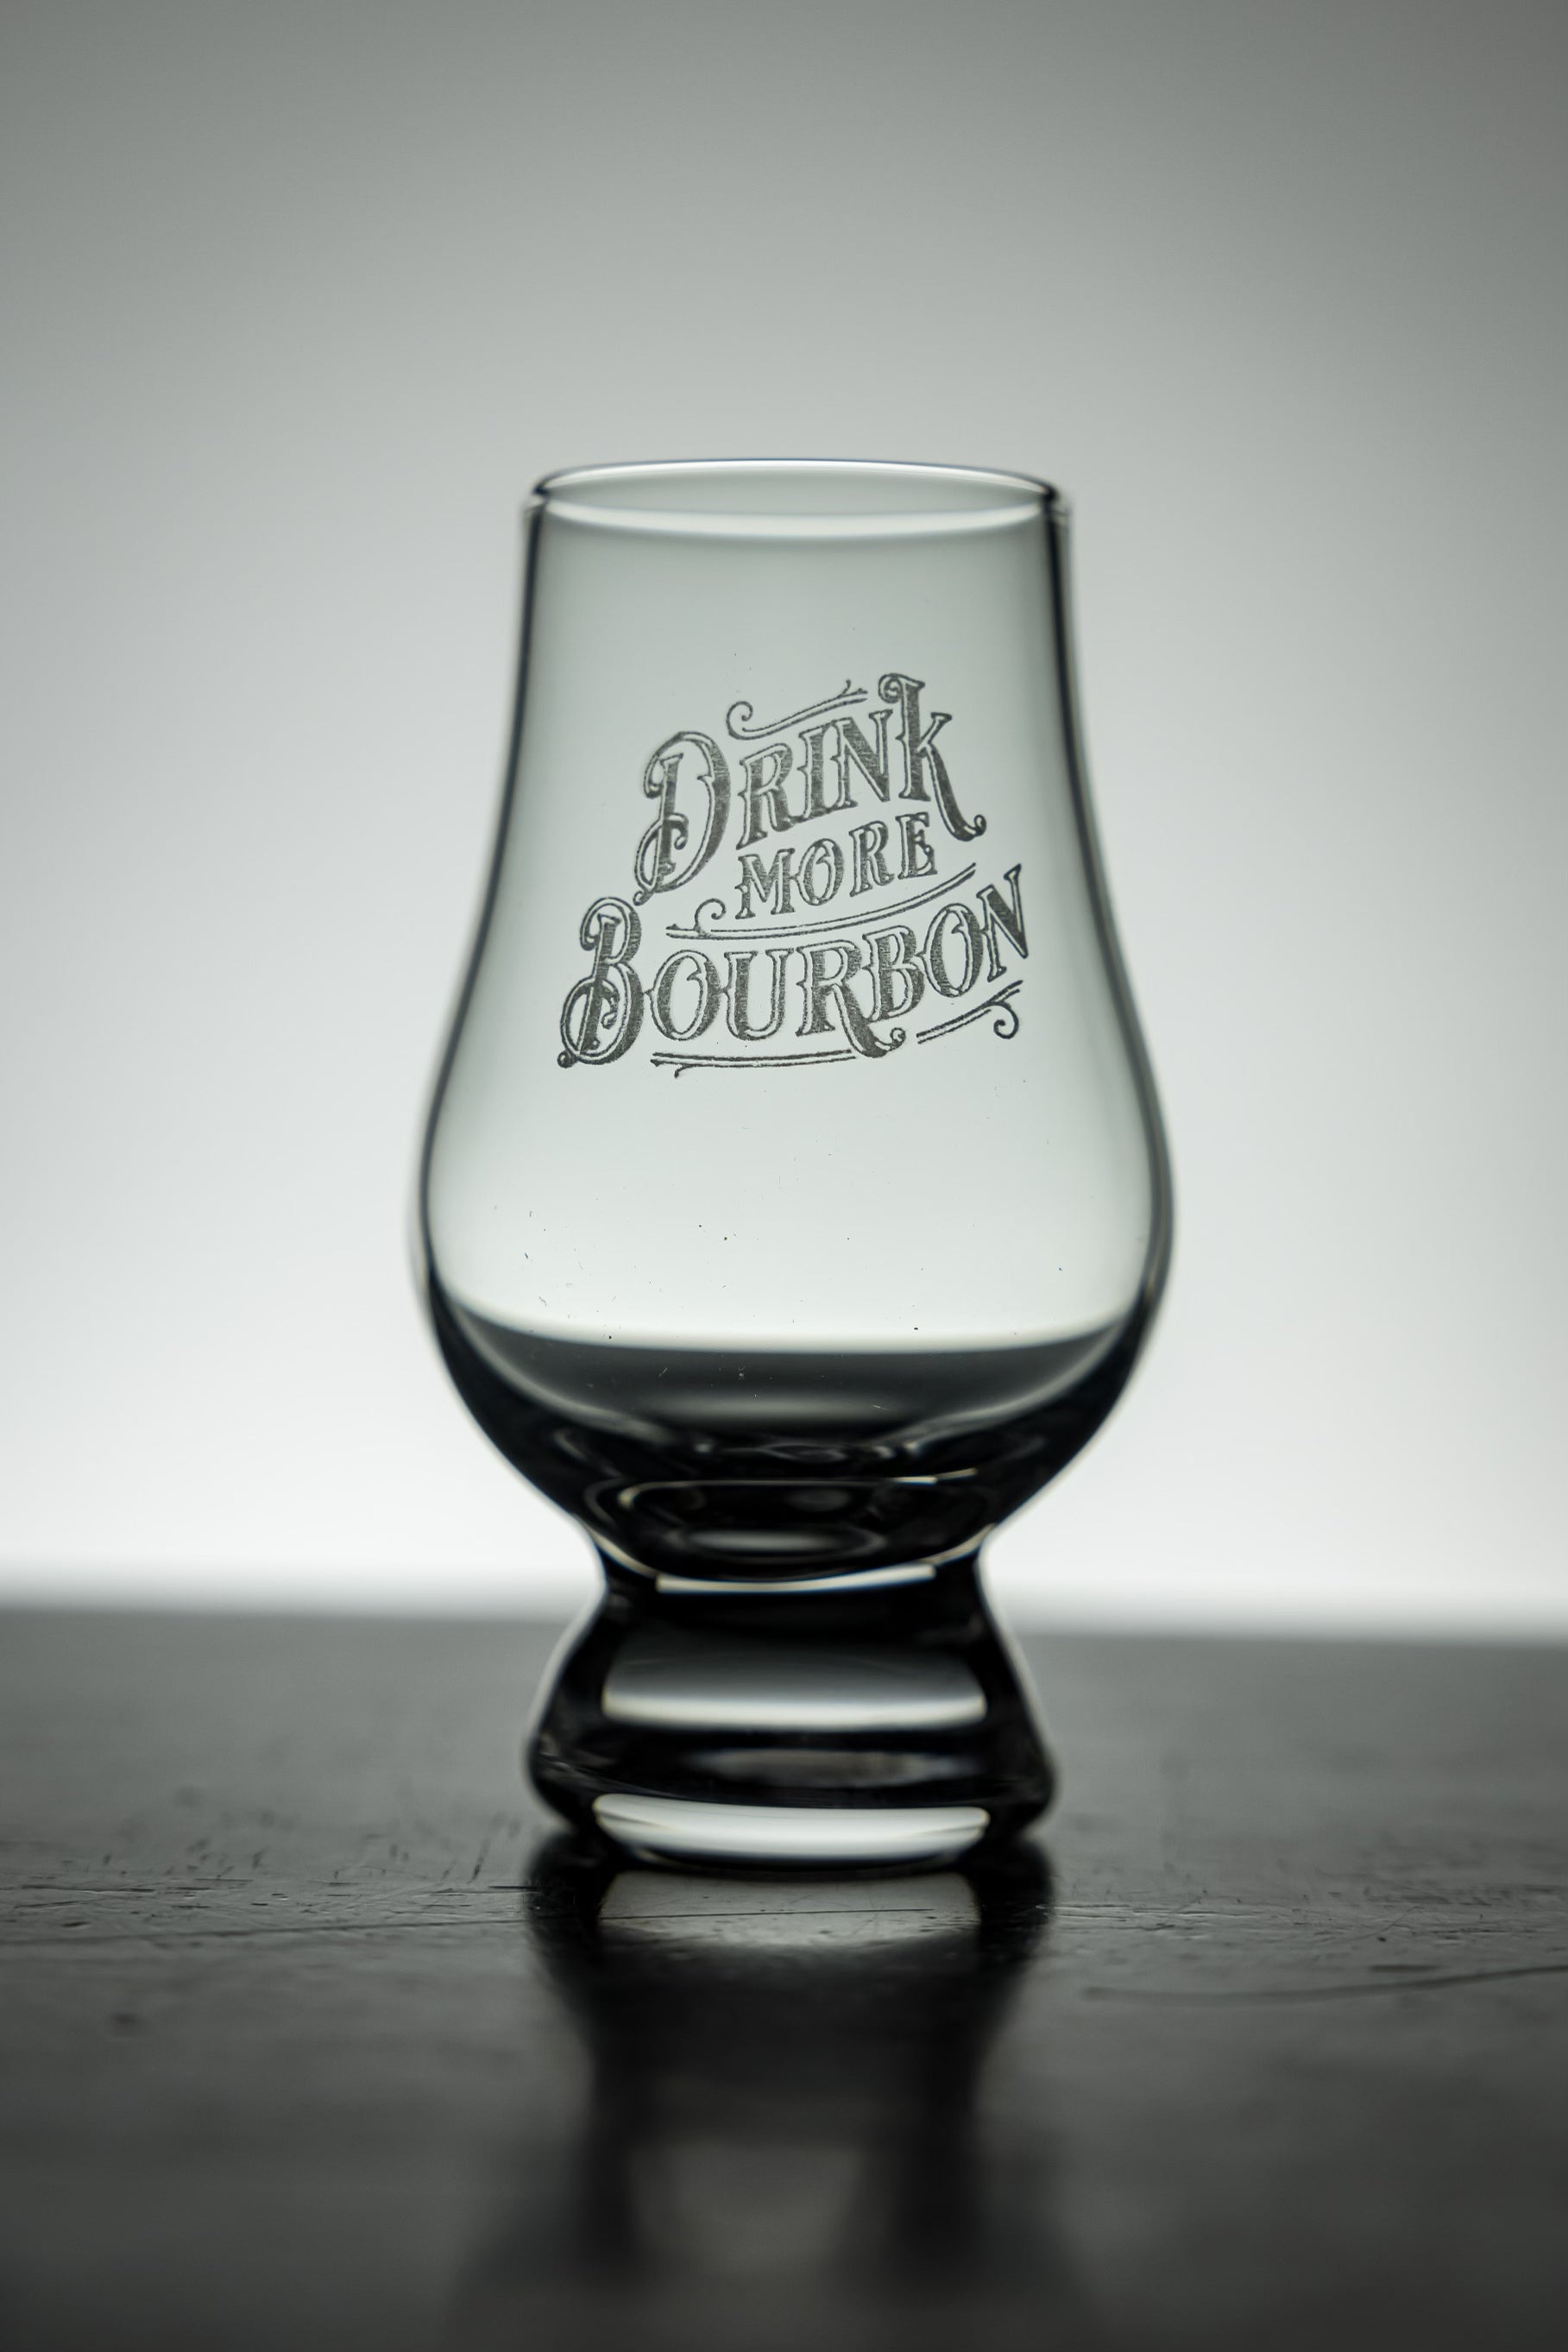 New to bourbon: Do I need to buy bourbon glasses? I see most of